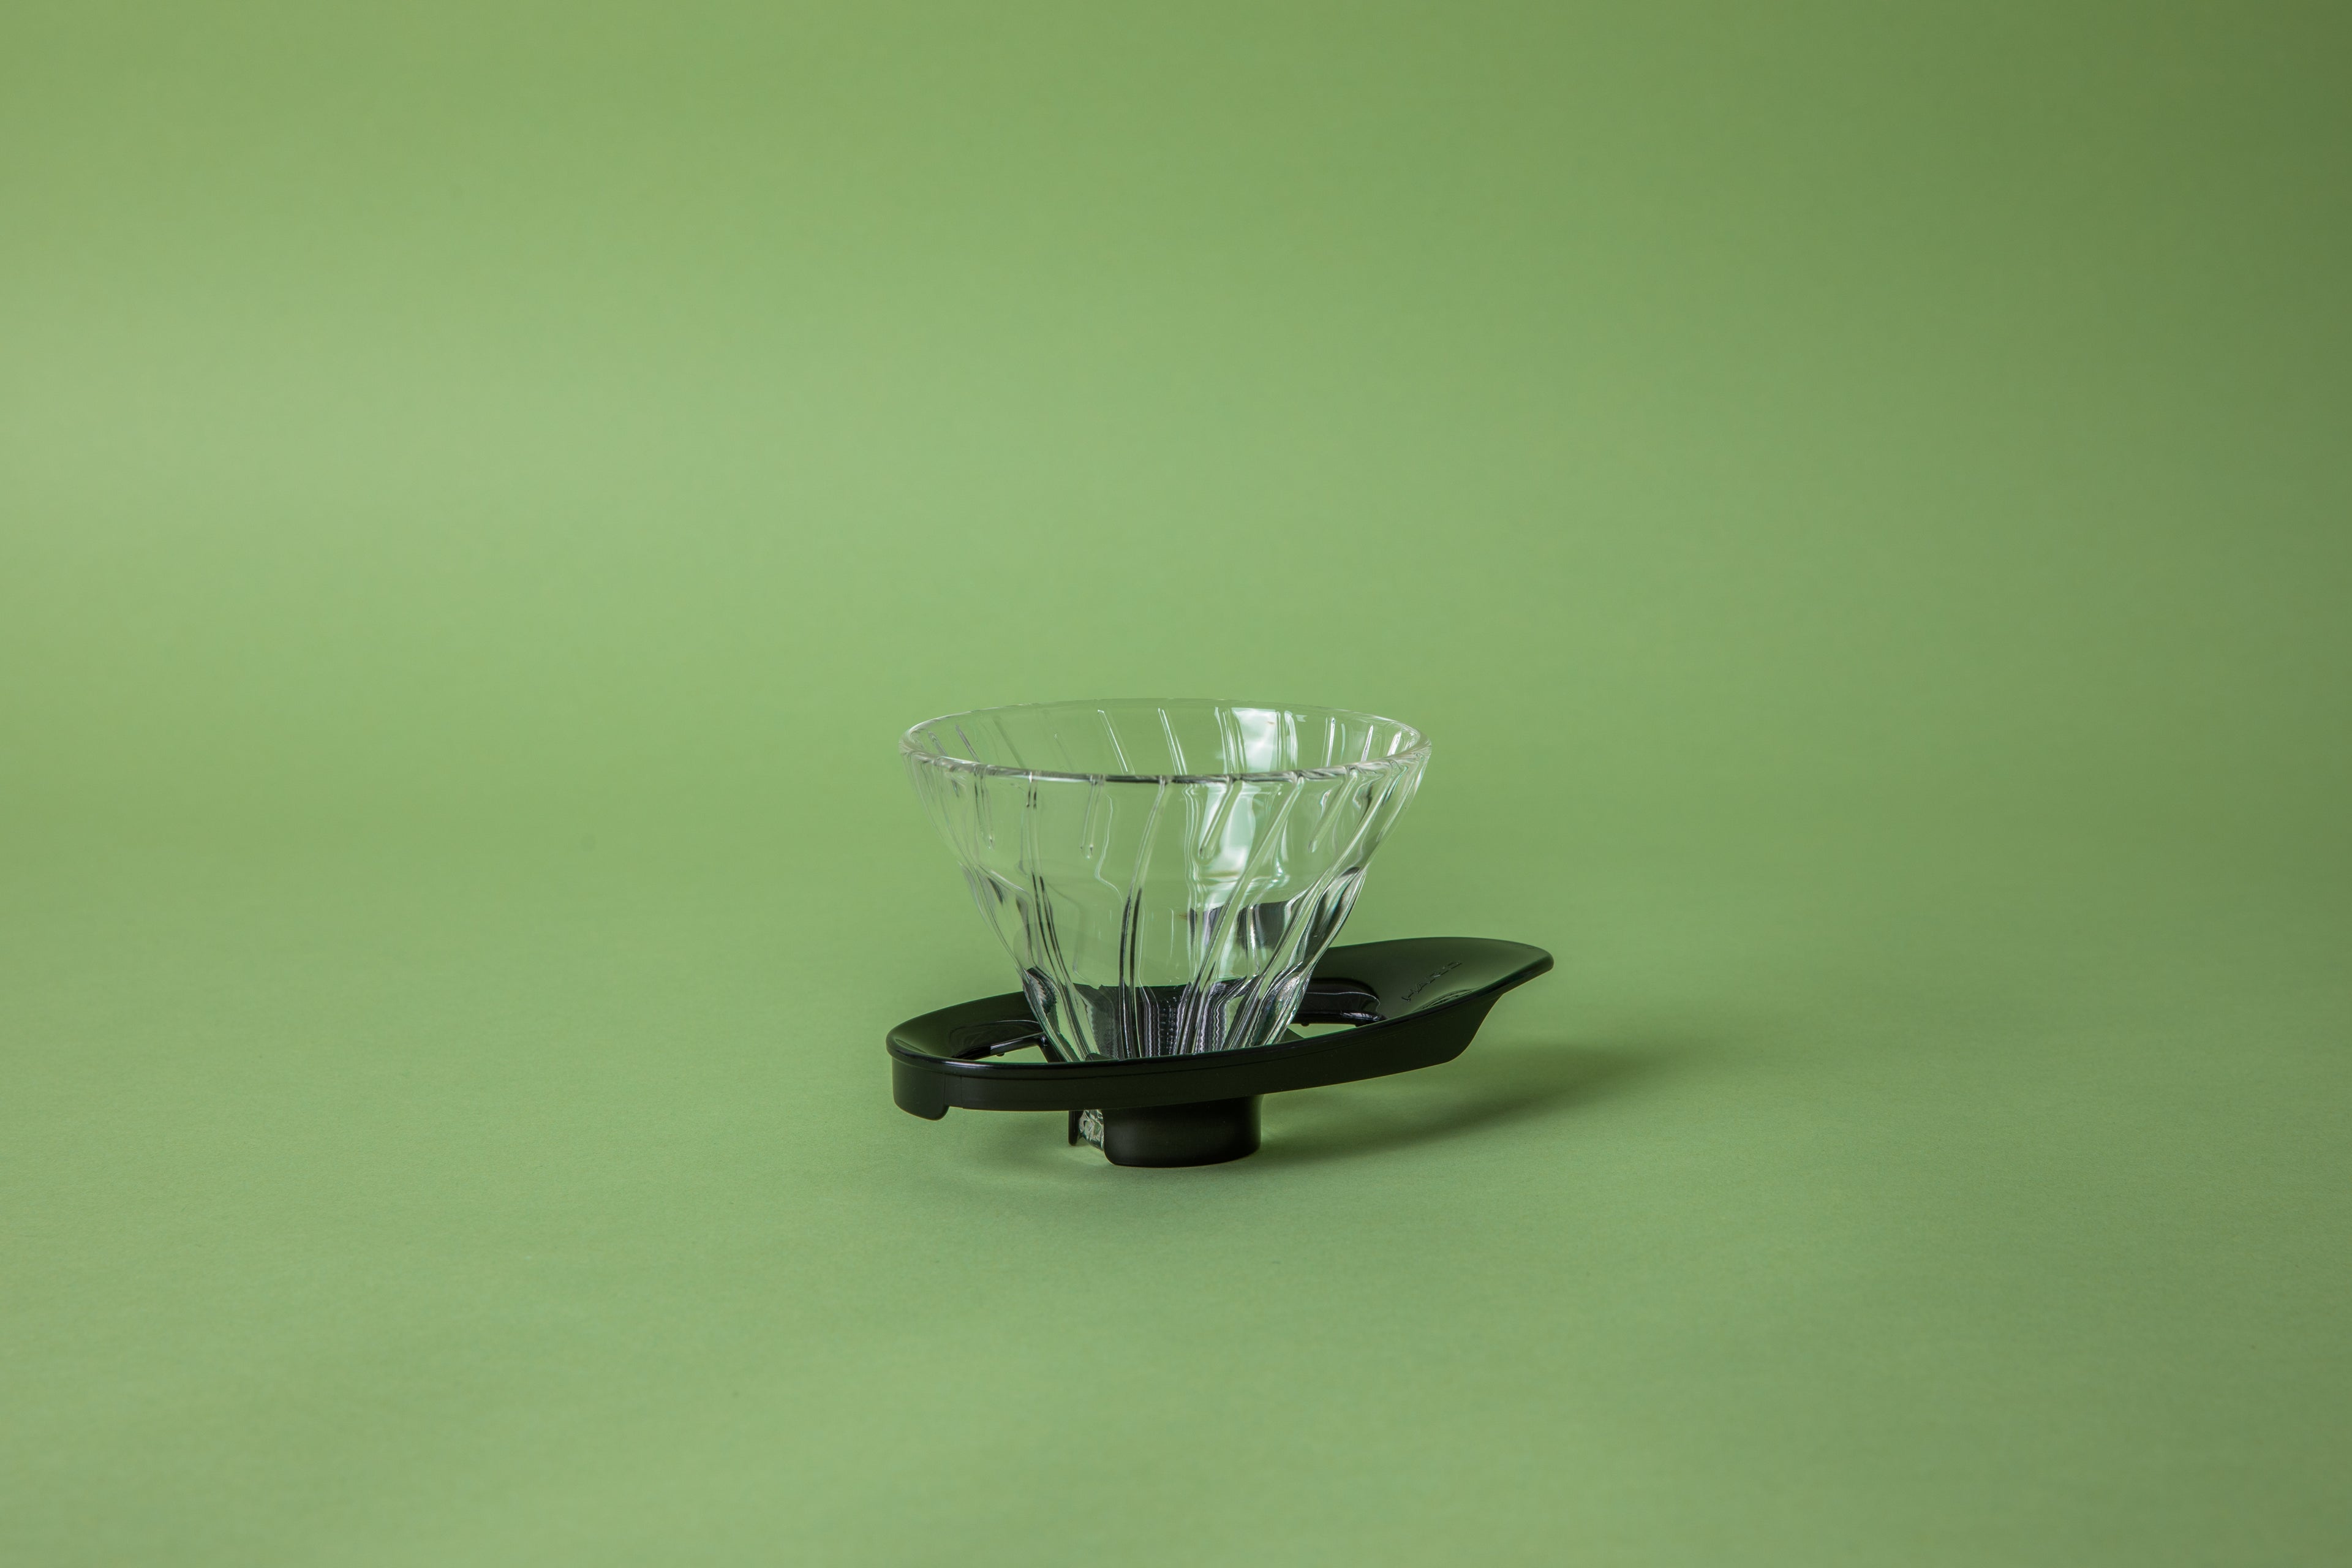 Clear transparent cone shaped coffee dripper with ribbed spiral. on a black plastic hollow base. Base shaped like a surfboard. Set on green background. 